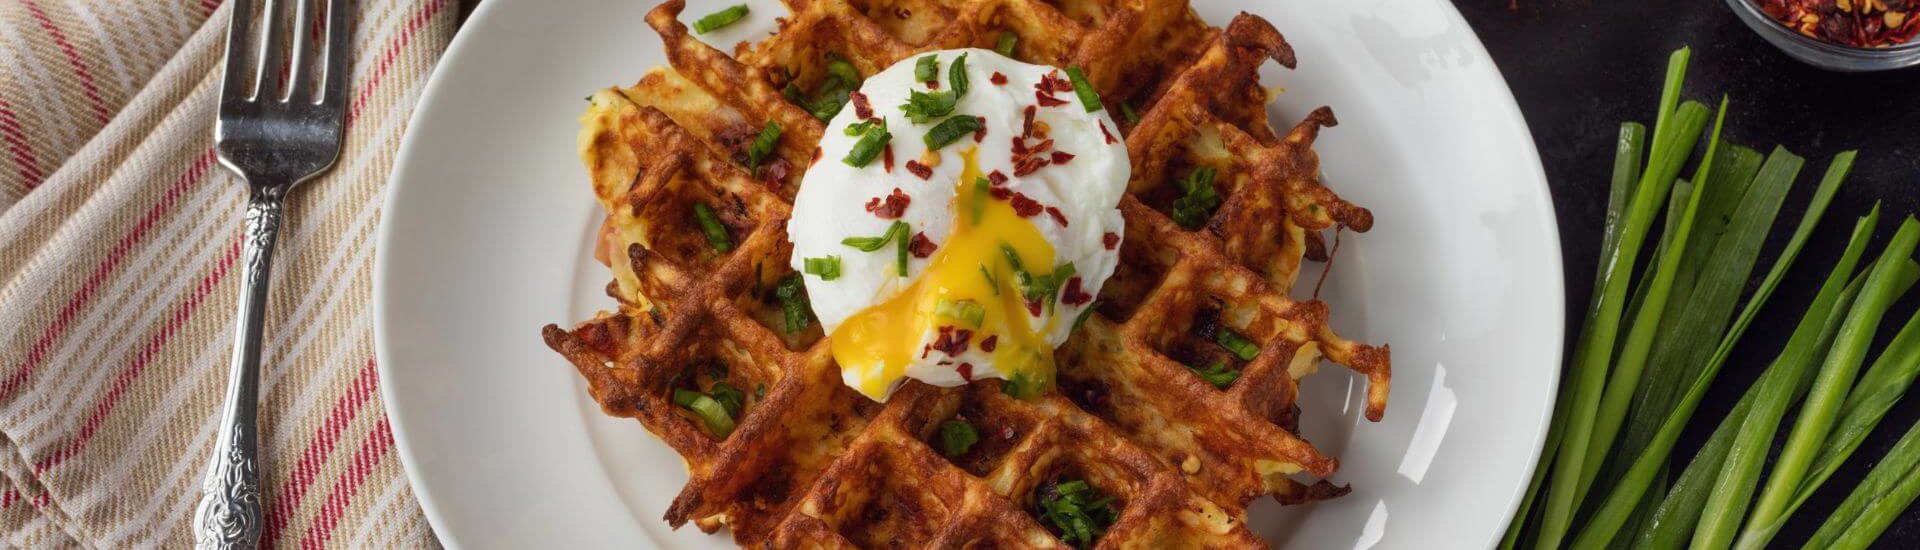 Waffles with poached eggs on a white plate with greens